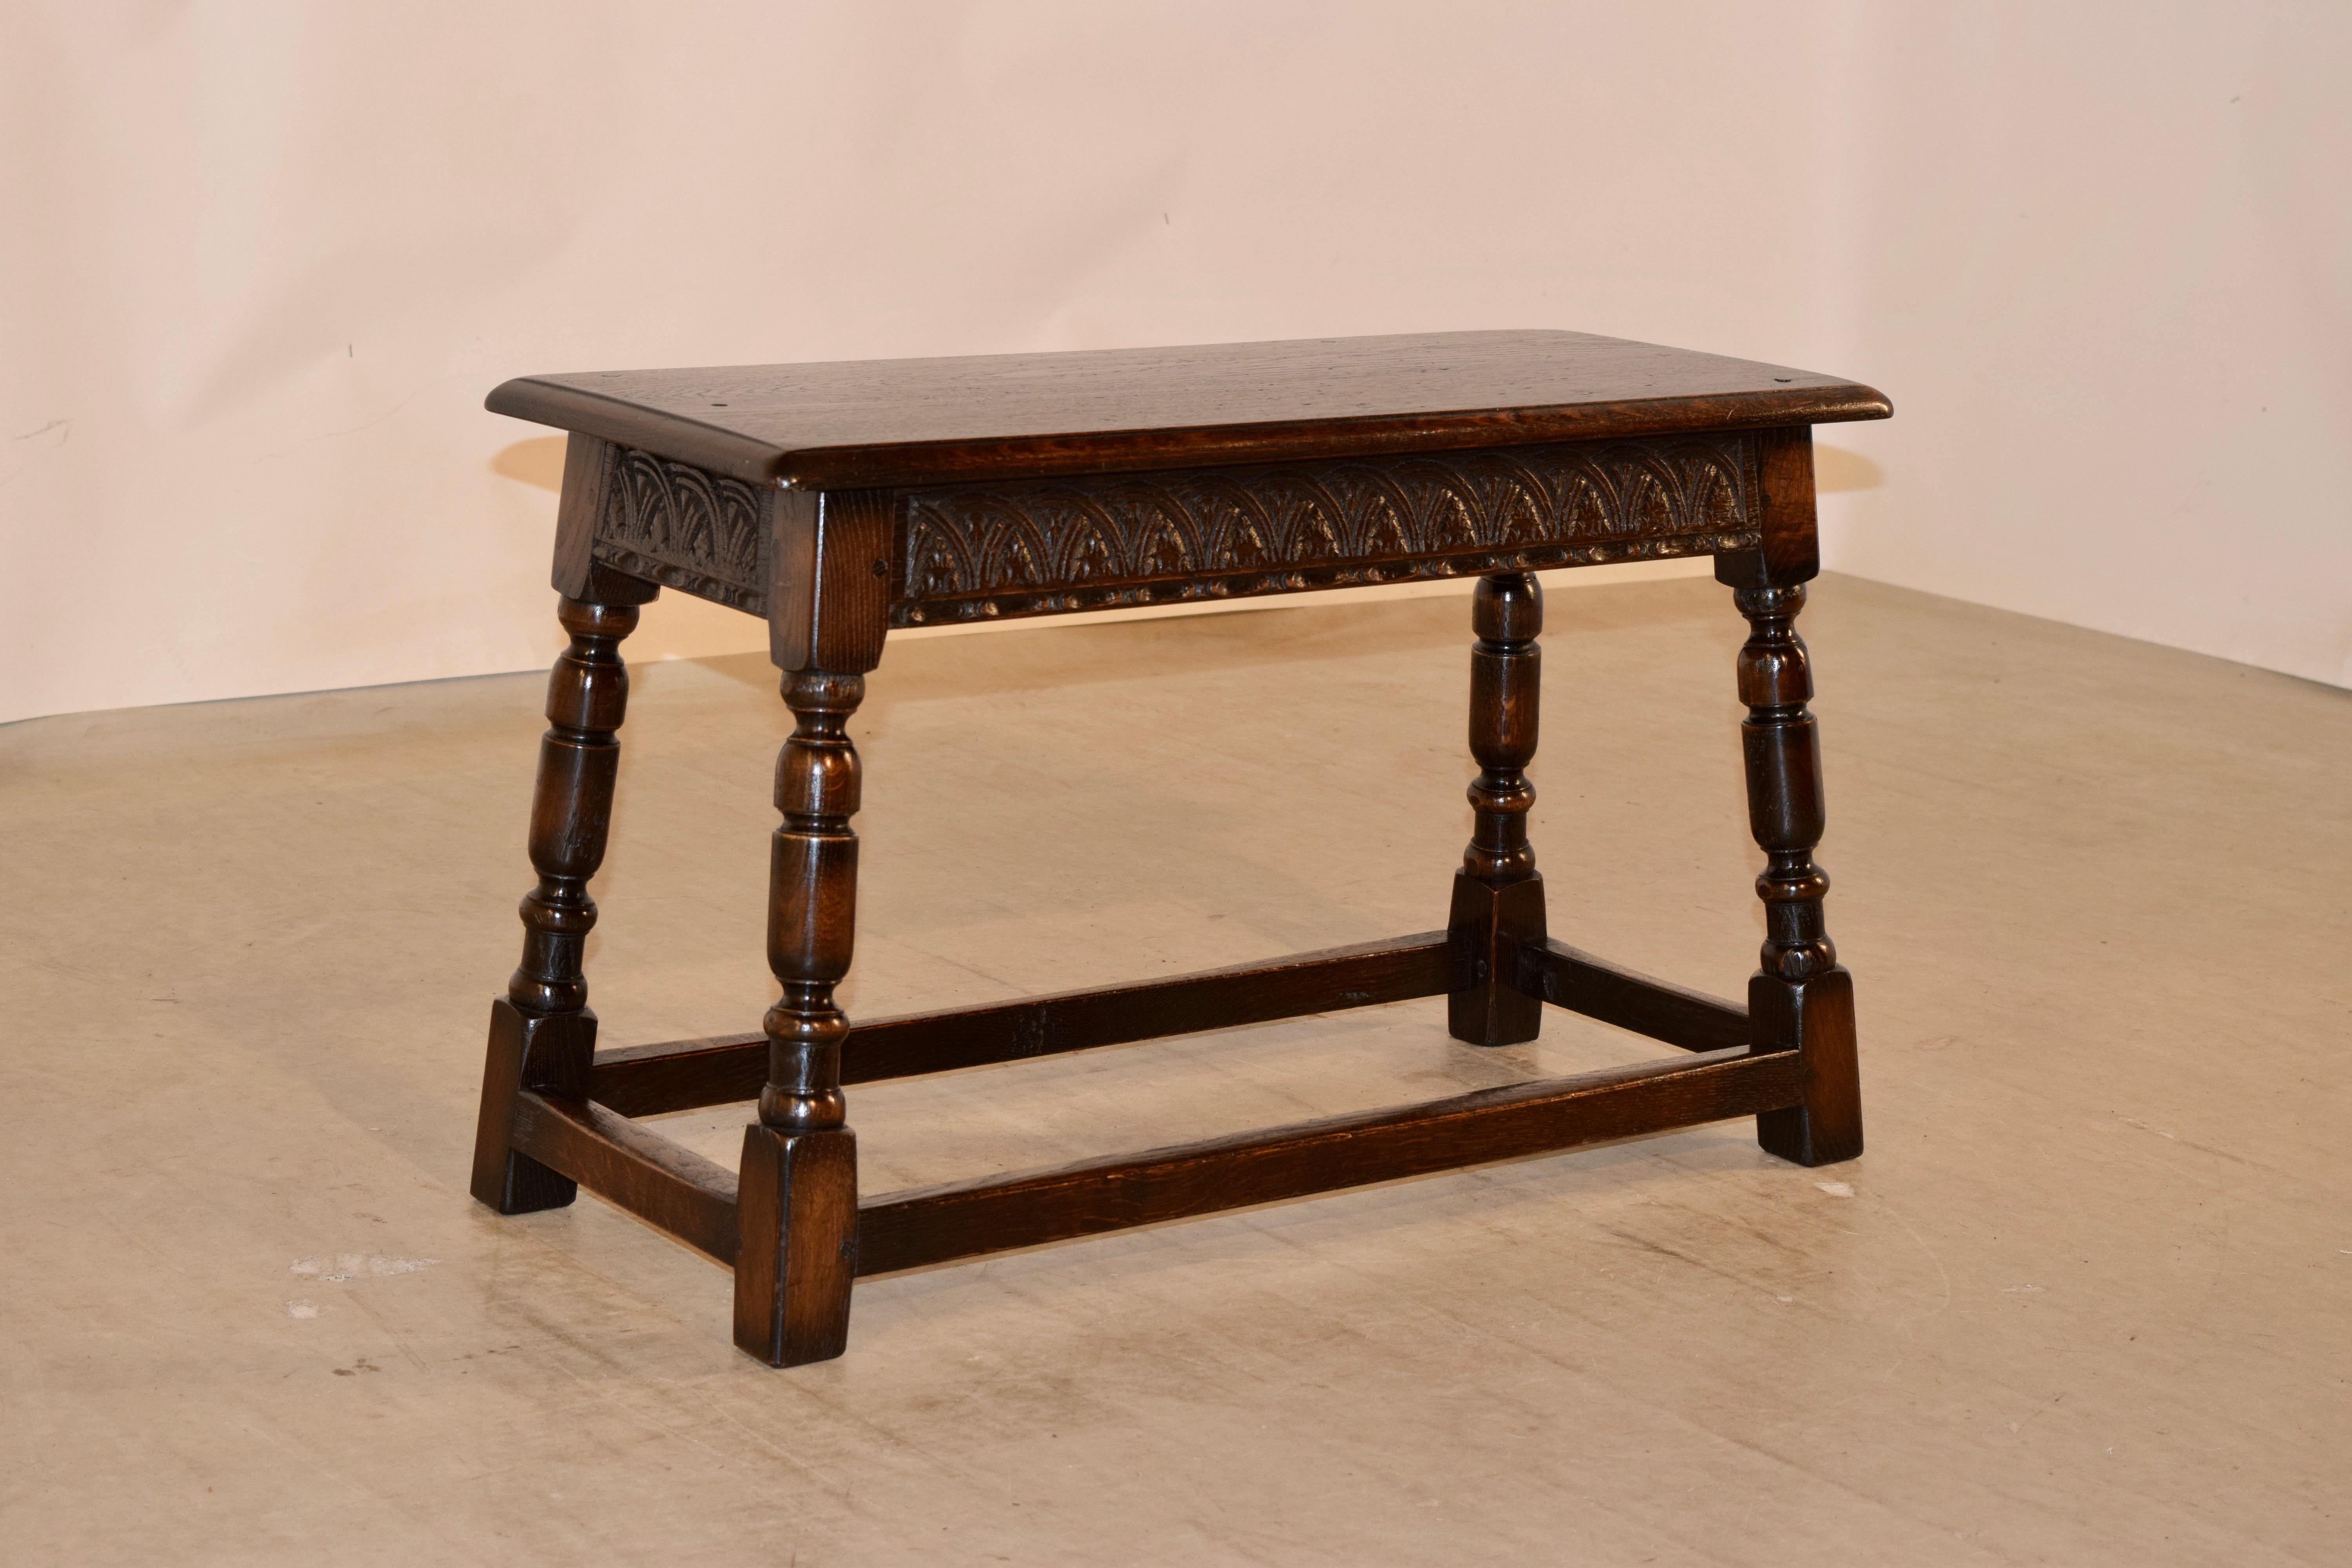 Late 19th century English oak joynt bench with a beveled edge around the top, following down to a hand carved decorated apron and splayed turned legs, joined by simple stretchers. Great size.